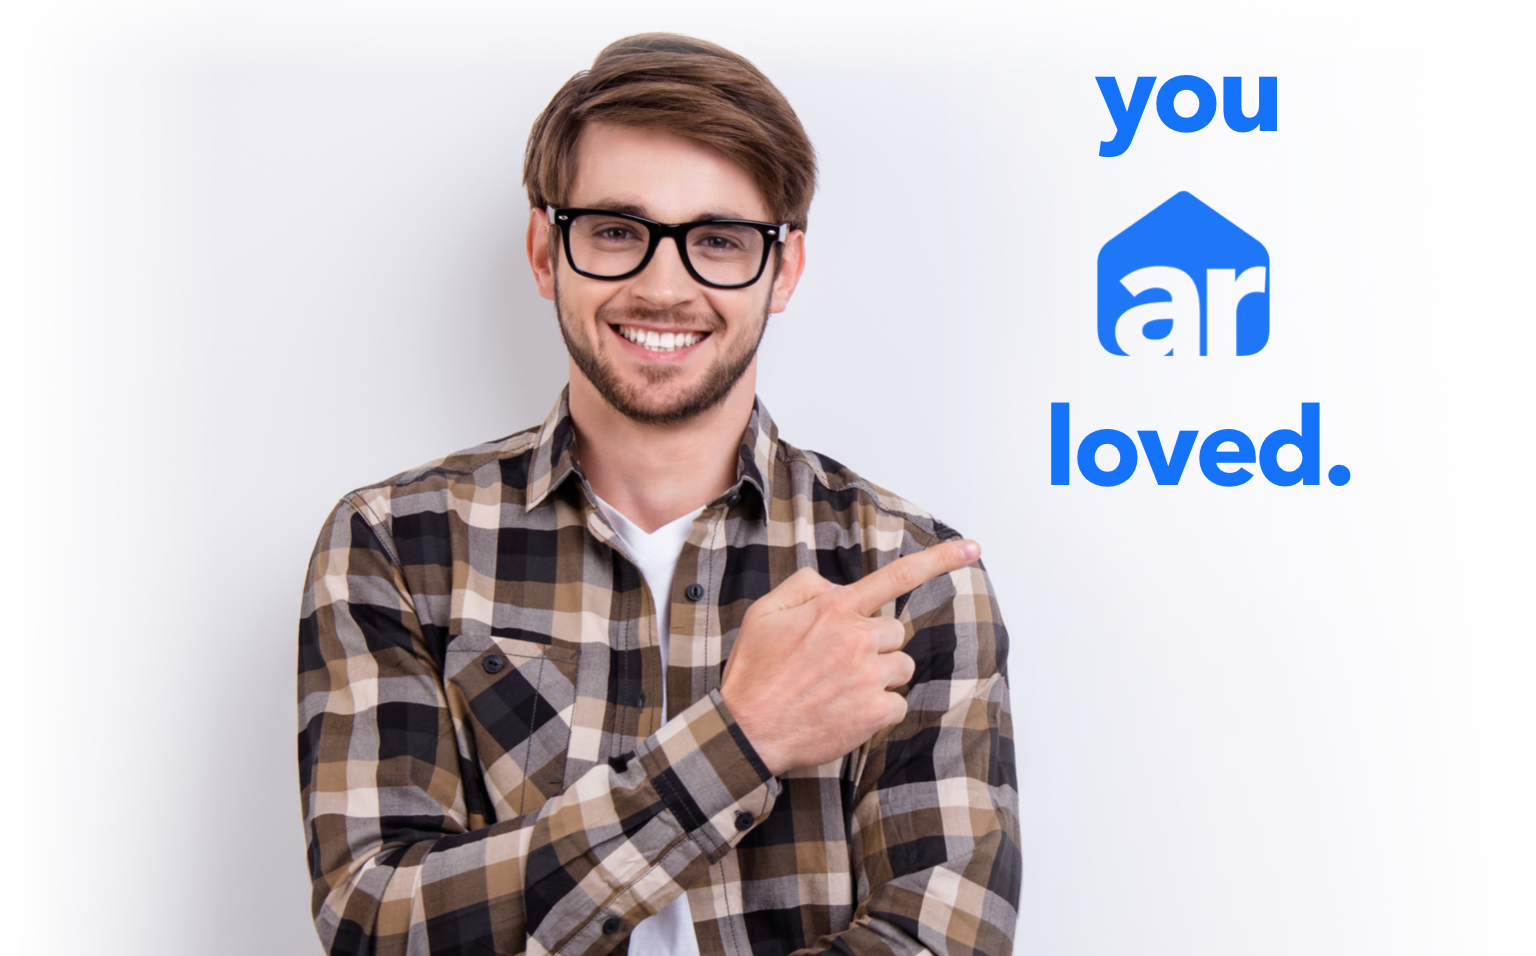 man in glasses and plaid shirt pointing at trademark branding logo 'you ar loved'